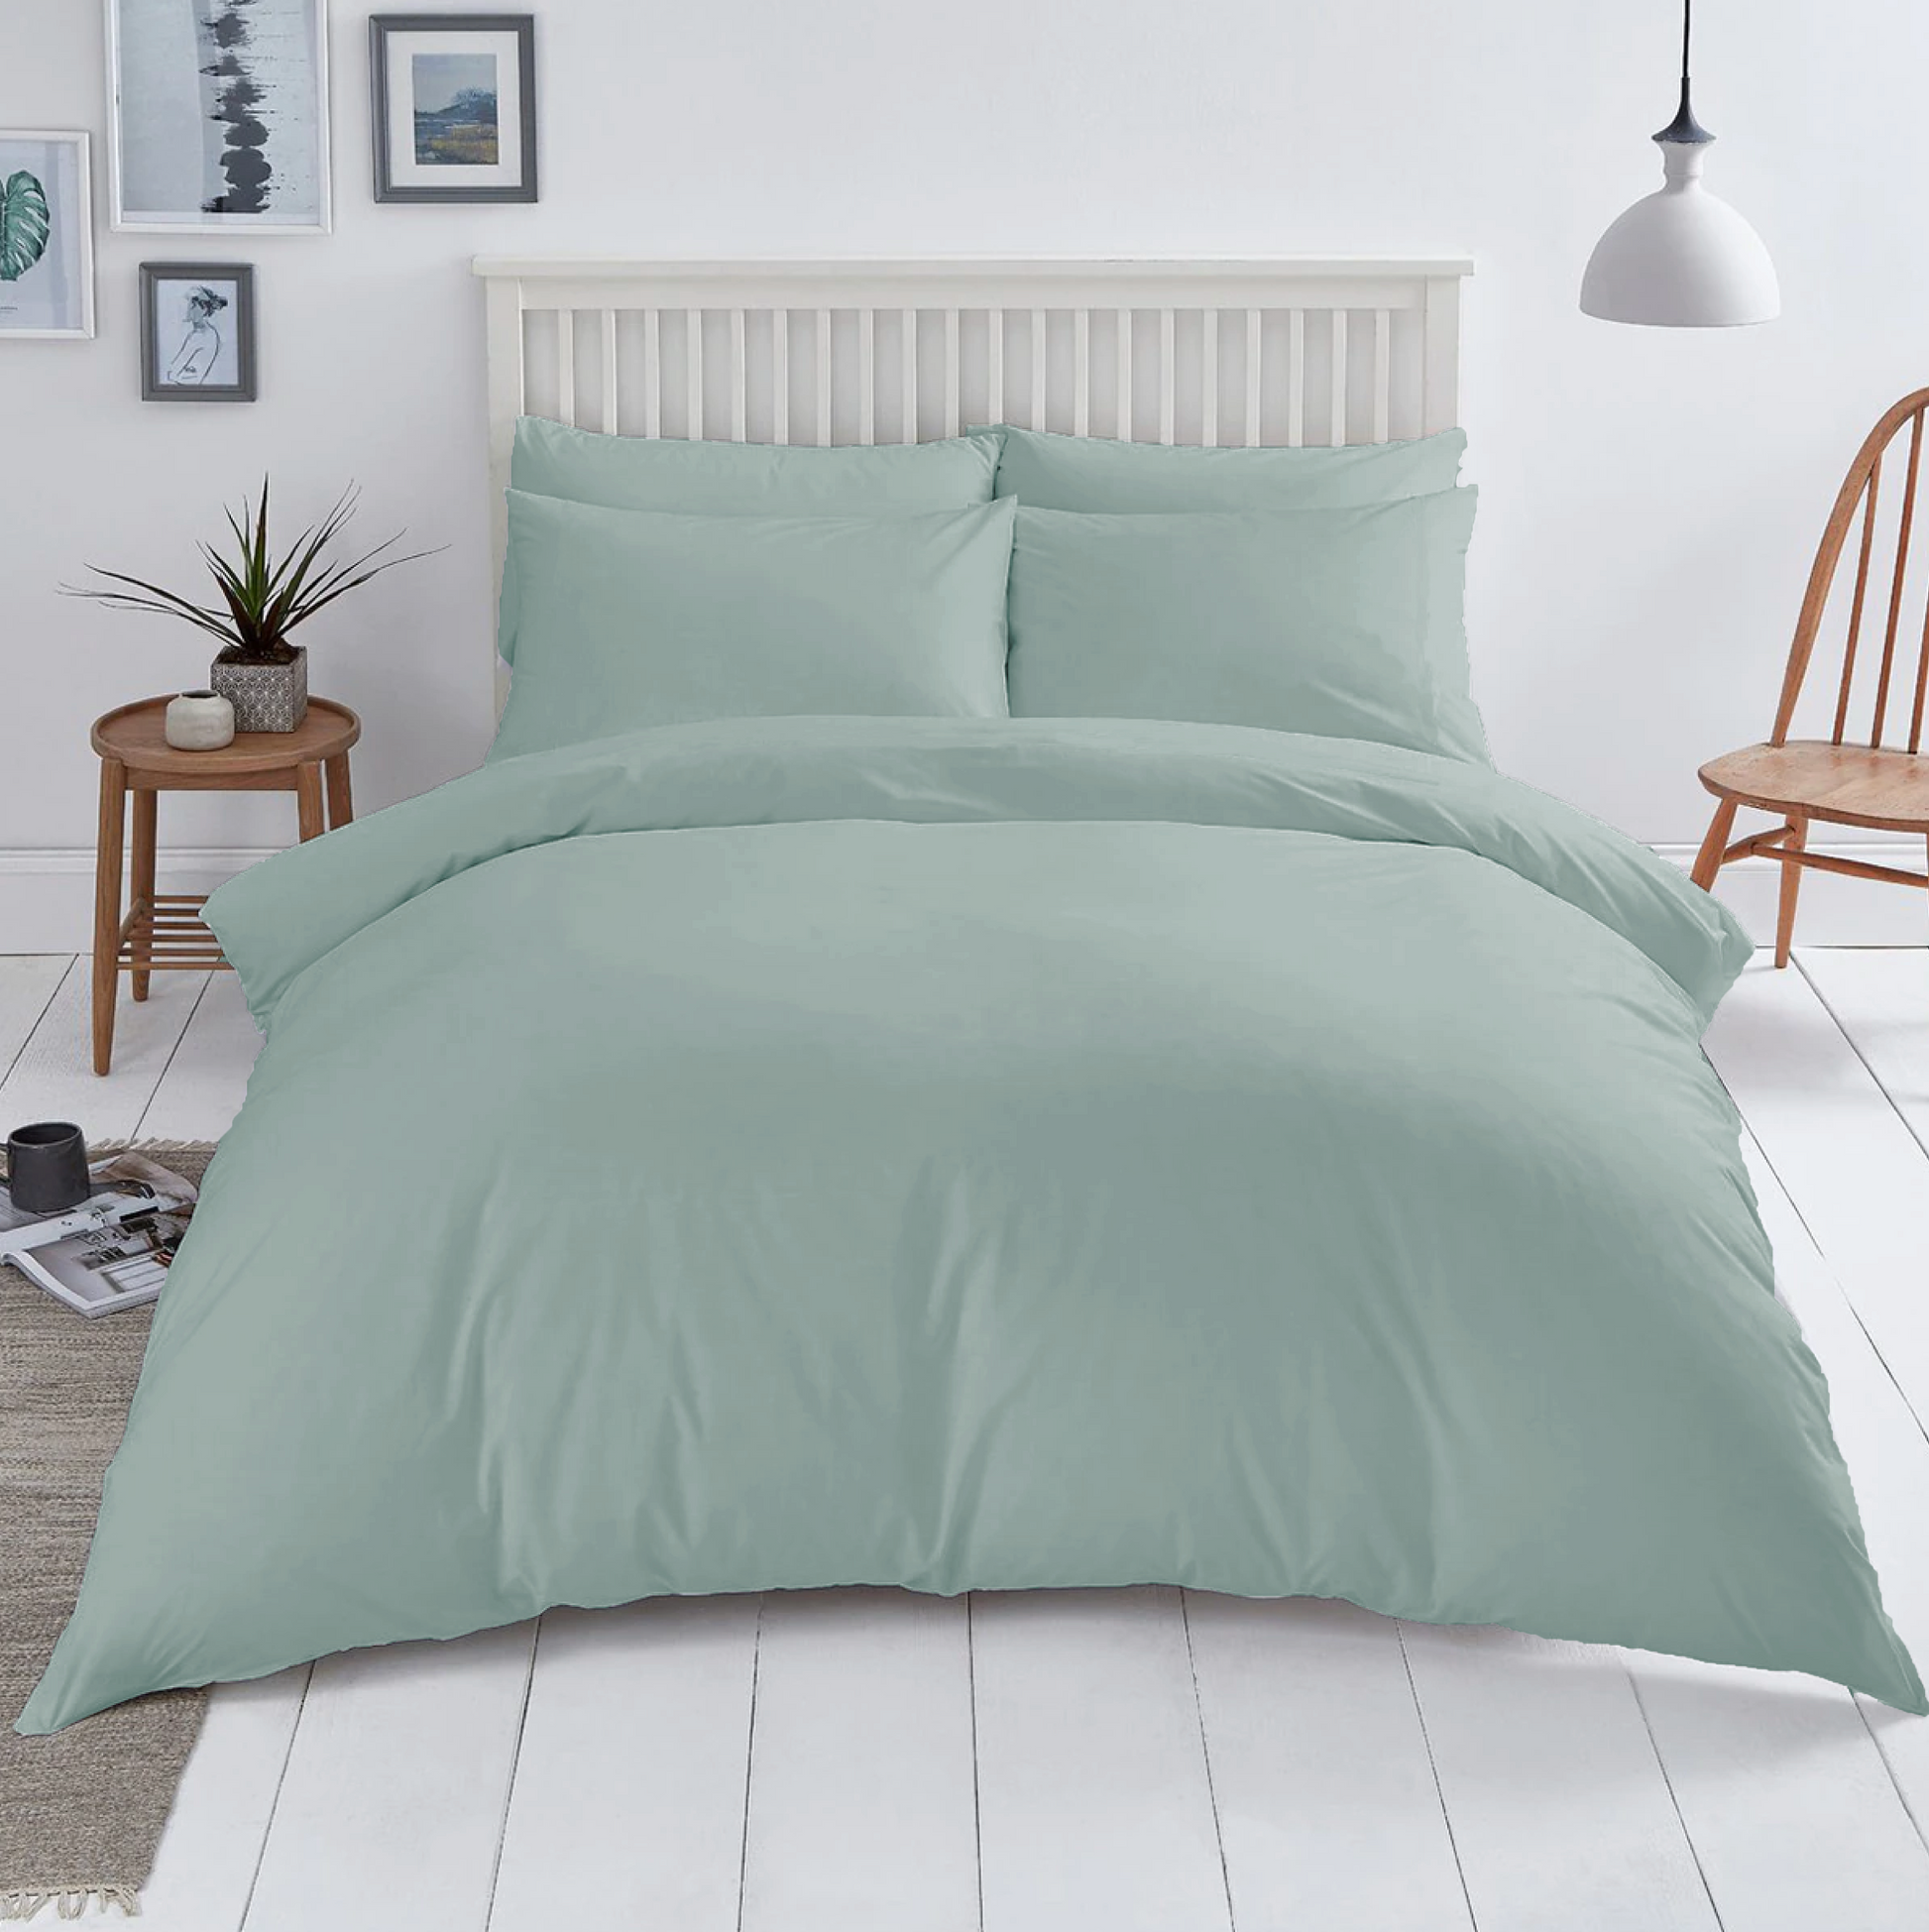 Mint color bedding set made of natural 100% cotton of the highest quality of high density. Comfortable, soft, durable. Elfsorenz.